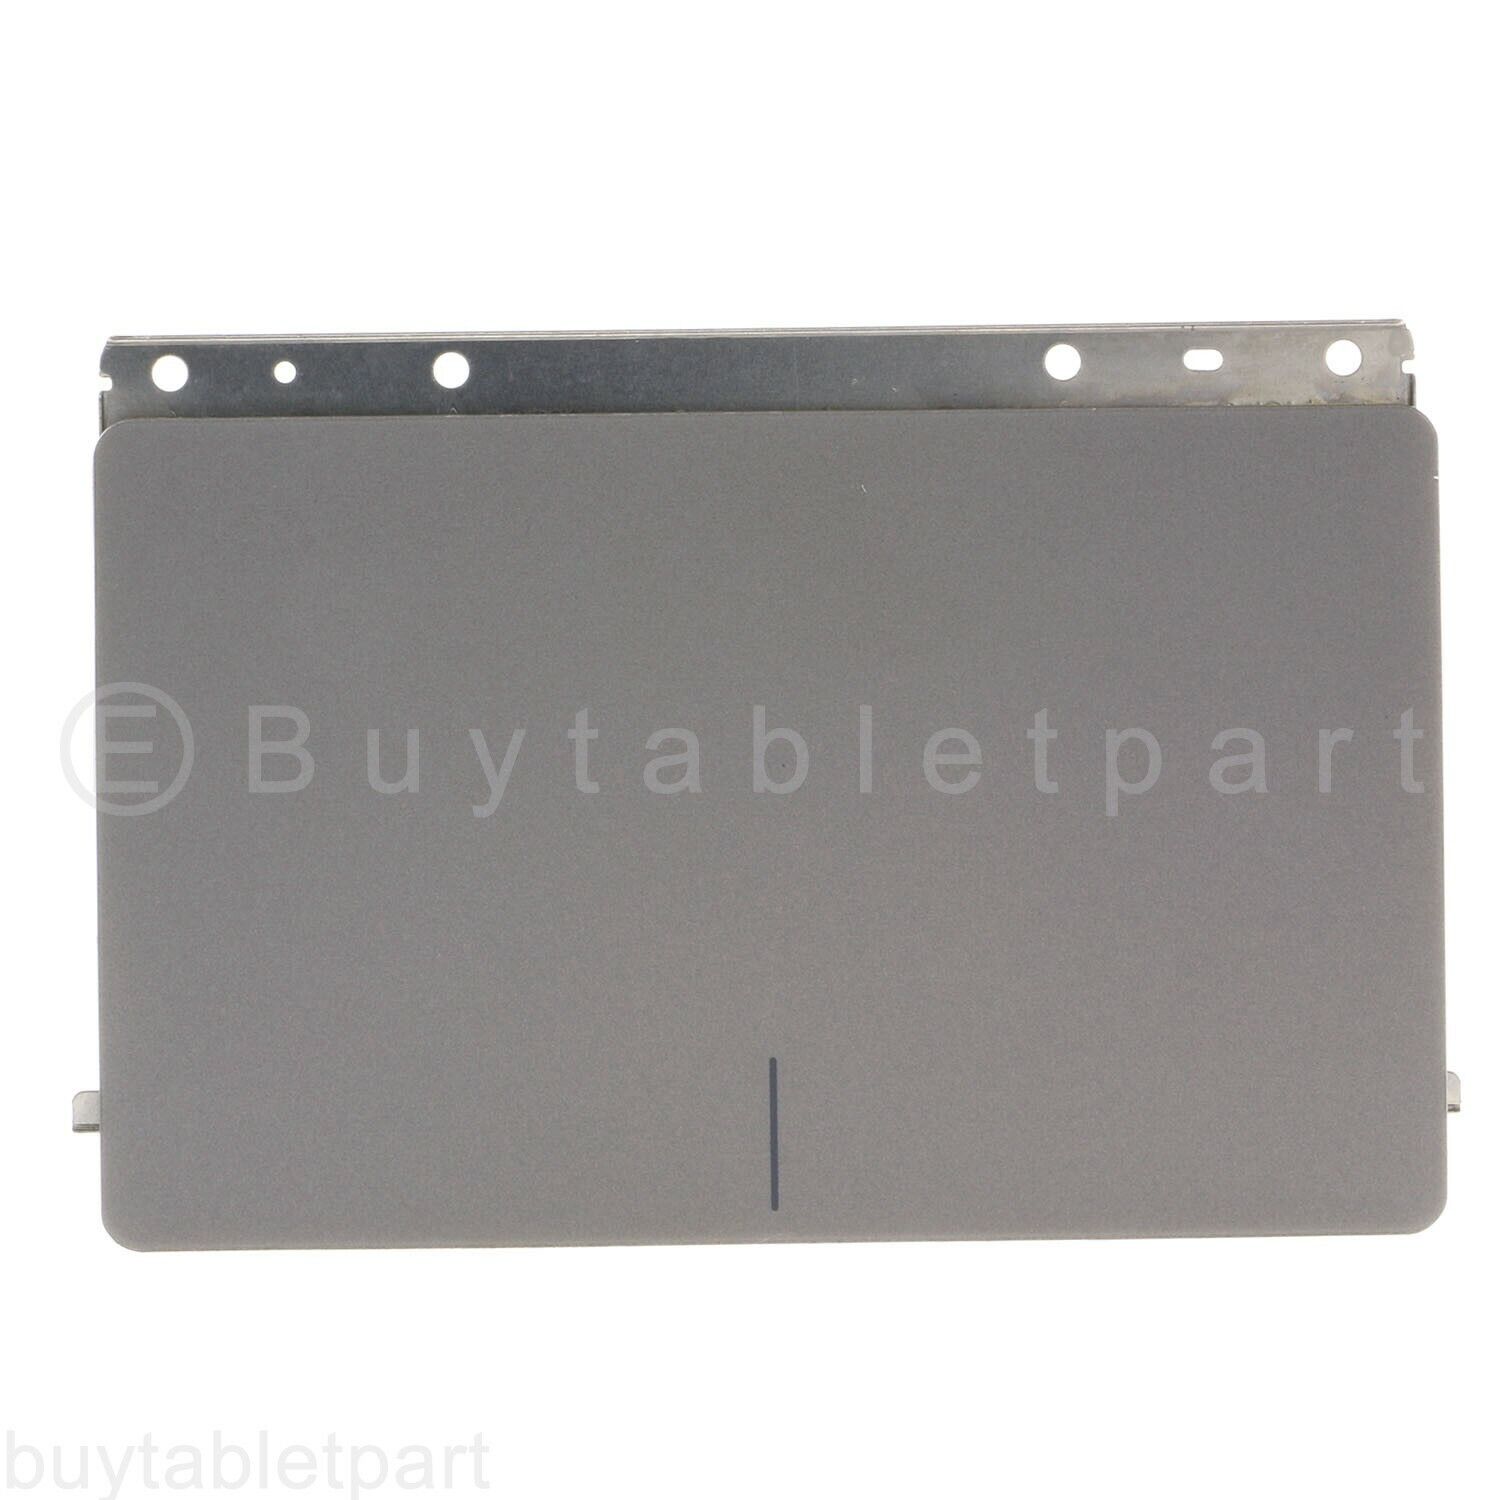 NEW TRACKPAD TOUCHPAD NO CABLE For Dell Inspiron 13 7370 7373 I7373-5558GRY-PUS